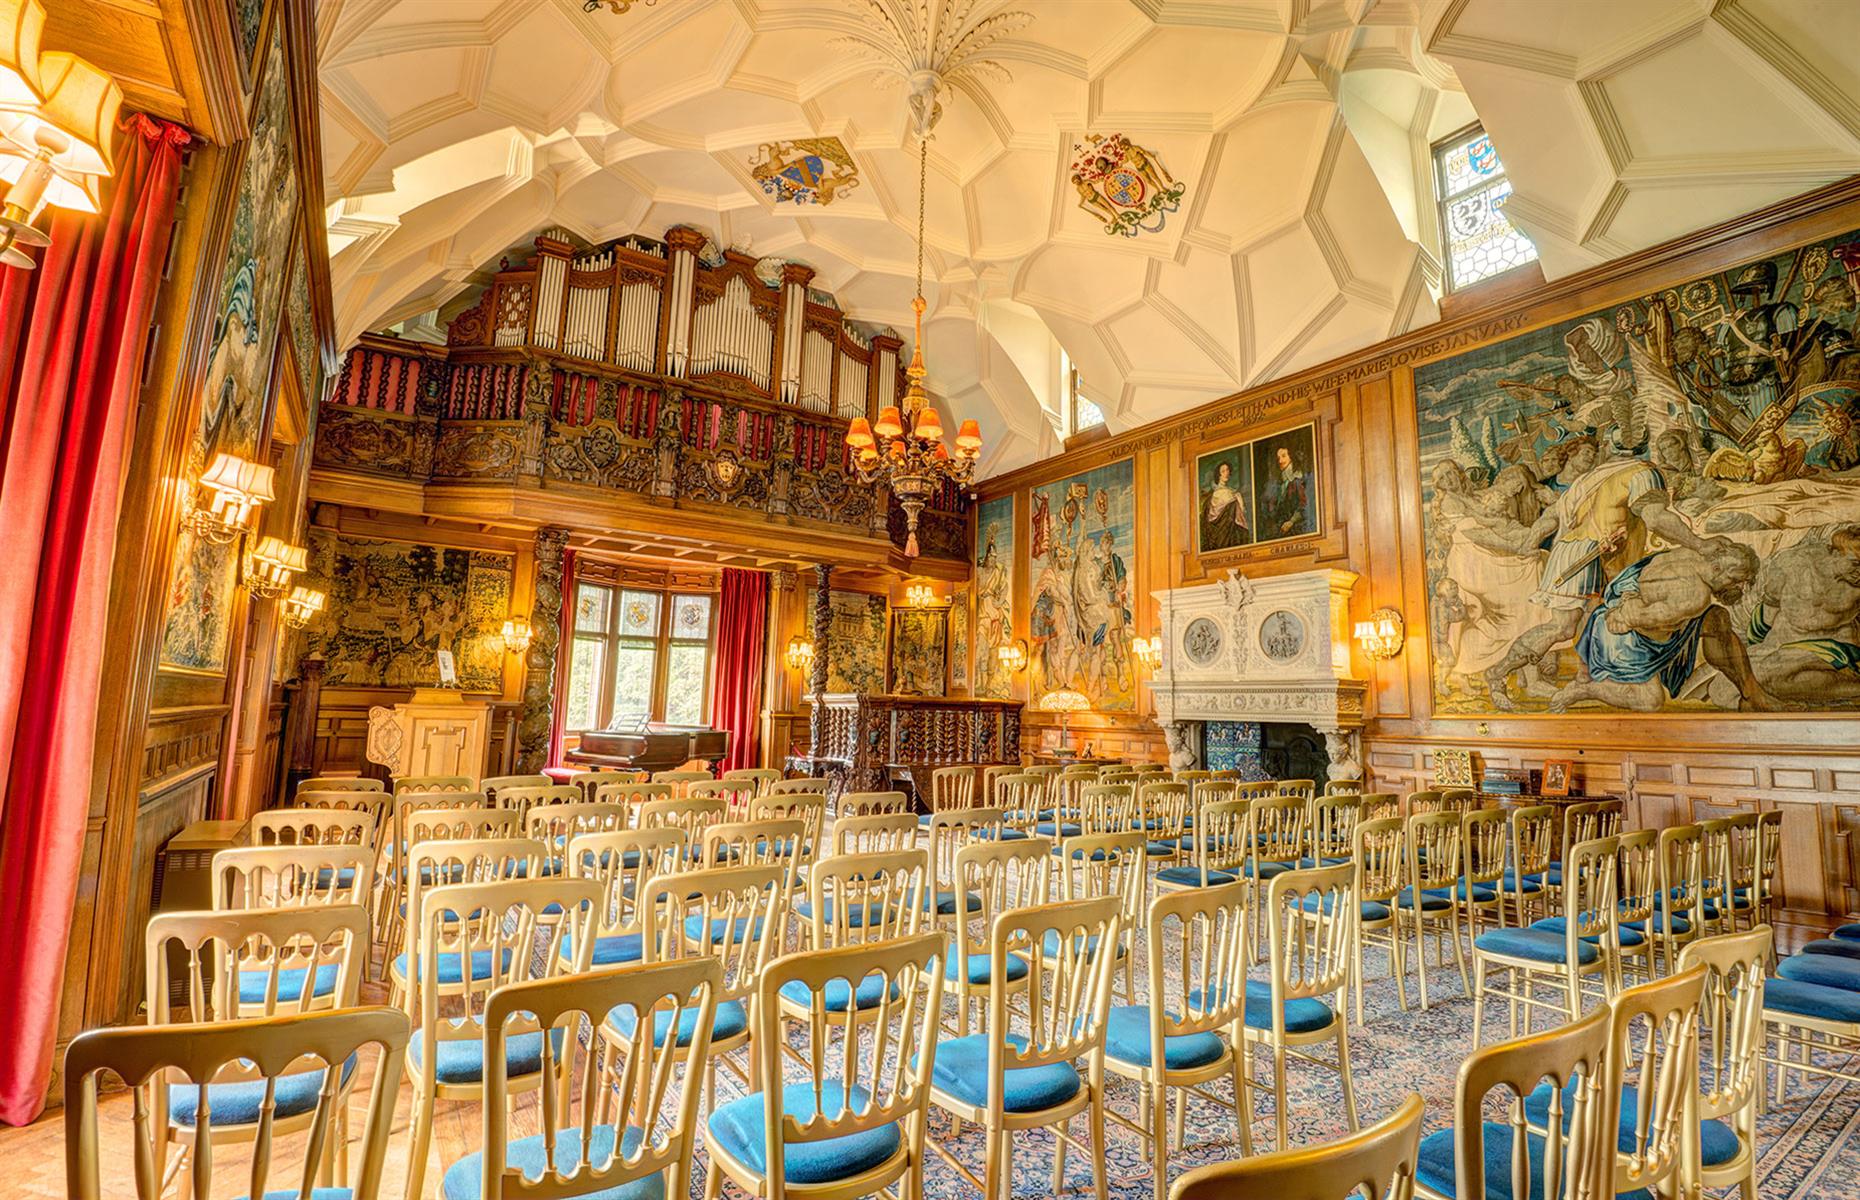 <p>Though Fyvie's interiors are extravagant and speak of great wealth (like this concert hall suggests), it's fair to say that not all former inhabitants enjoyed their time here. The Green Lady is Fyvie's <a href="https://hiddenscotland.co/listings/fyvie-castle-halloween/">resident ghost</a>, said to be the spirit of Lilias Drummond, wife of Alexander Seton, who was locked away in one of the rooms for failing to produce a male heir. She eventually starved to death. Yikes.</p>  <p><a href="http://bit.ly/3roL4wv"><strong>Love this? Follow our Facebook page for more travel inspiration</strong></a></p>